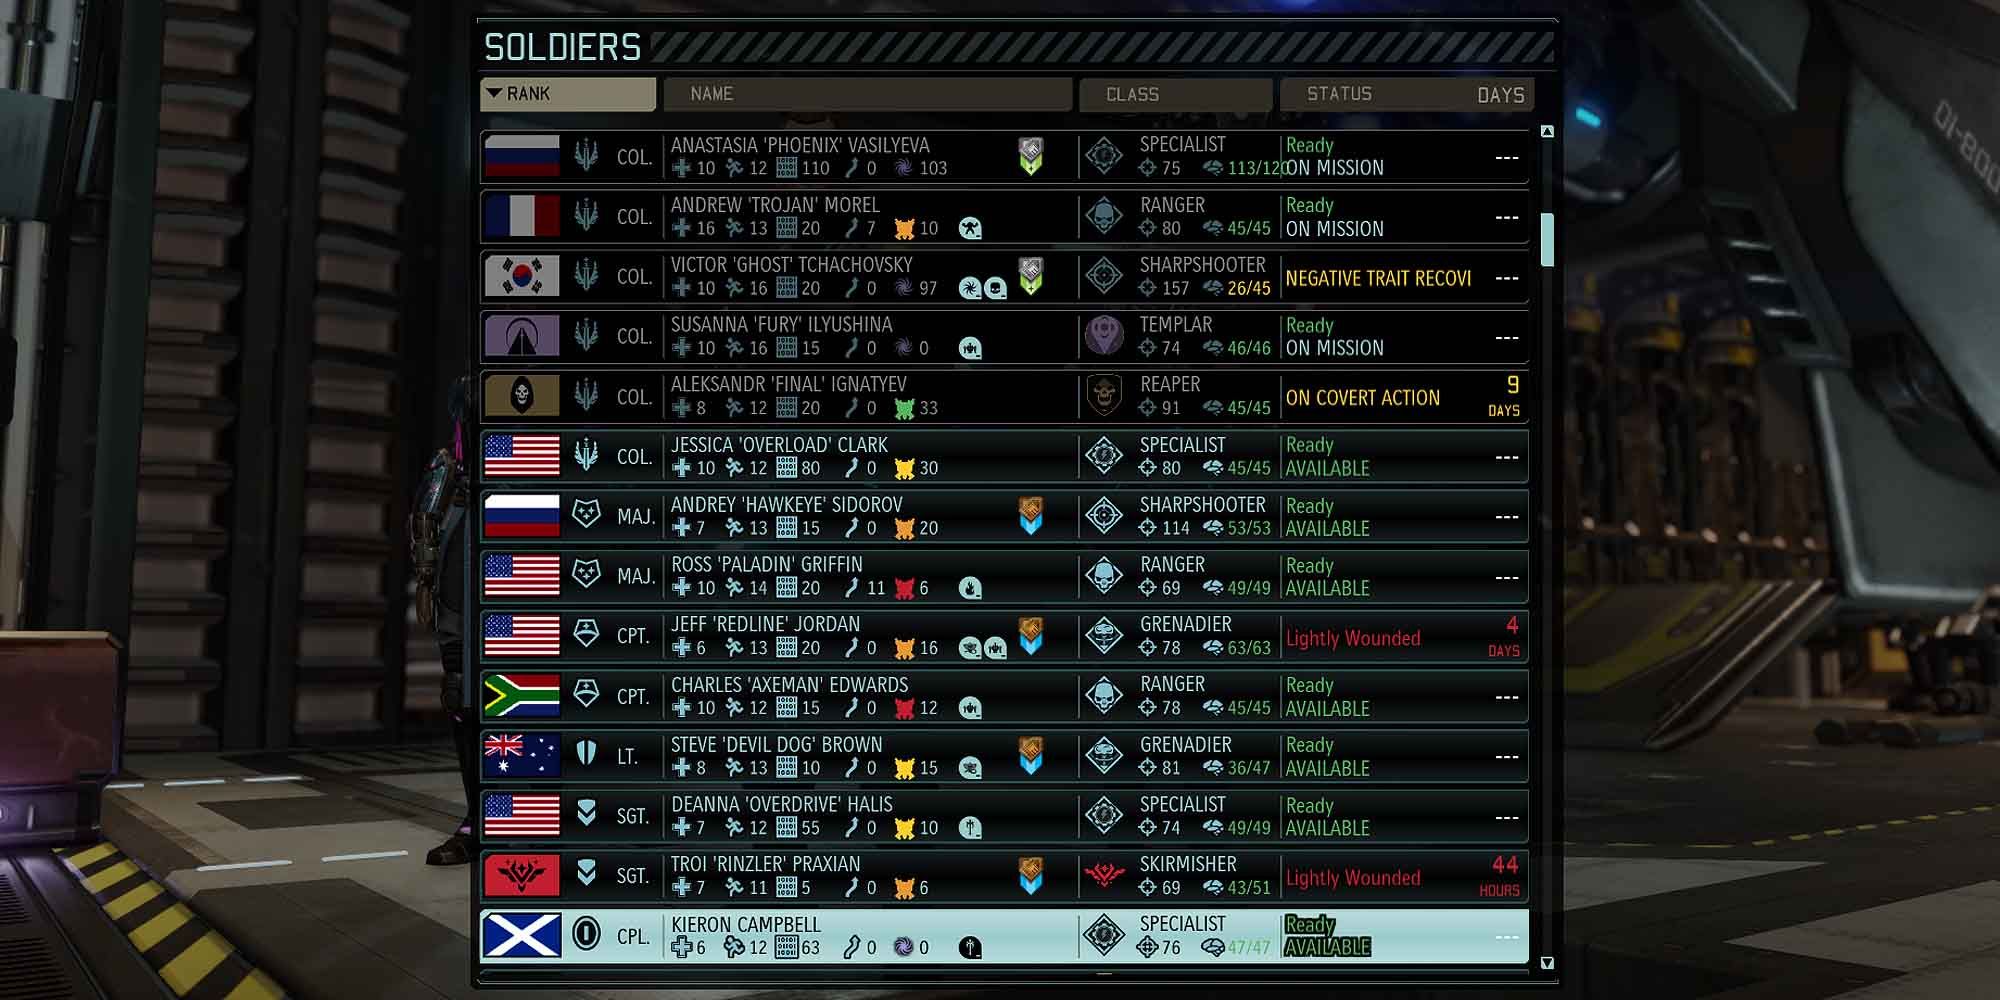 The Soldier List in Xcom 2